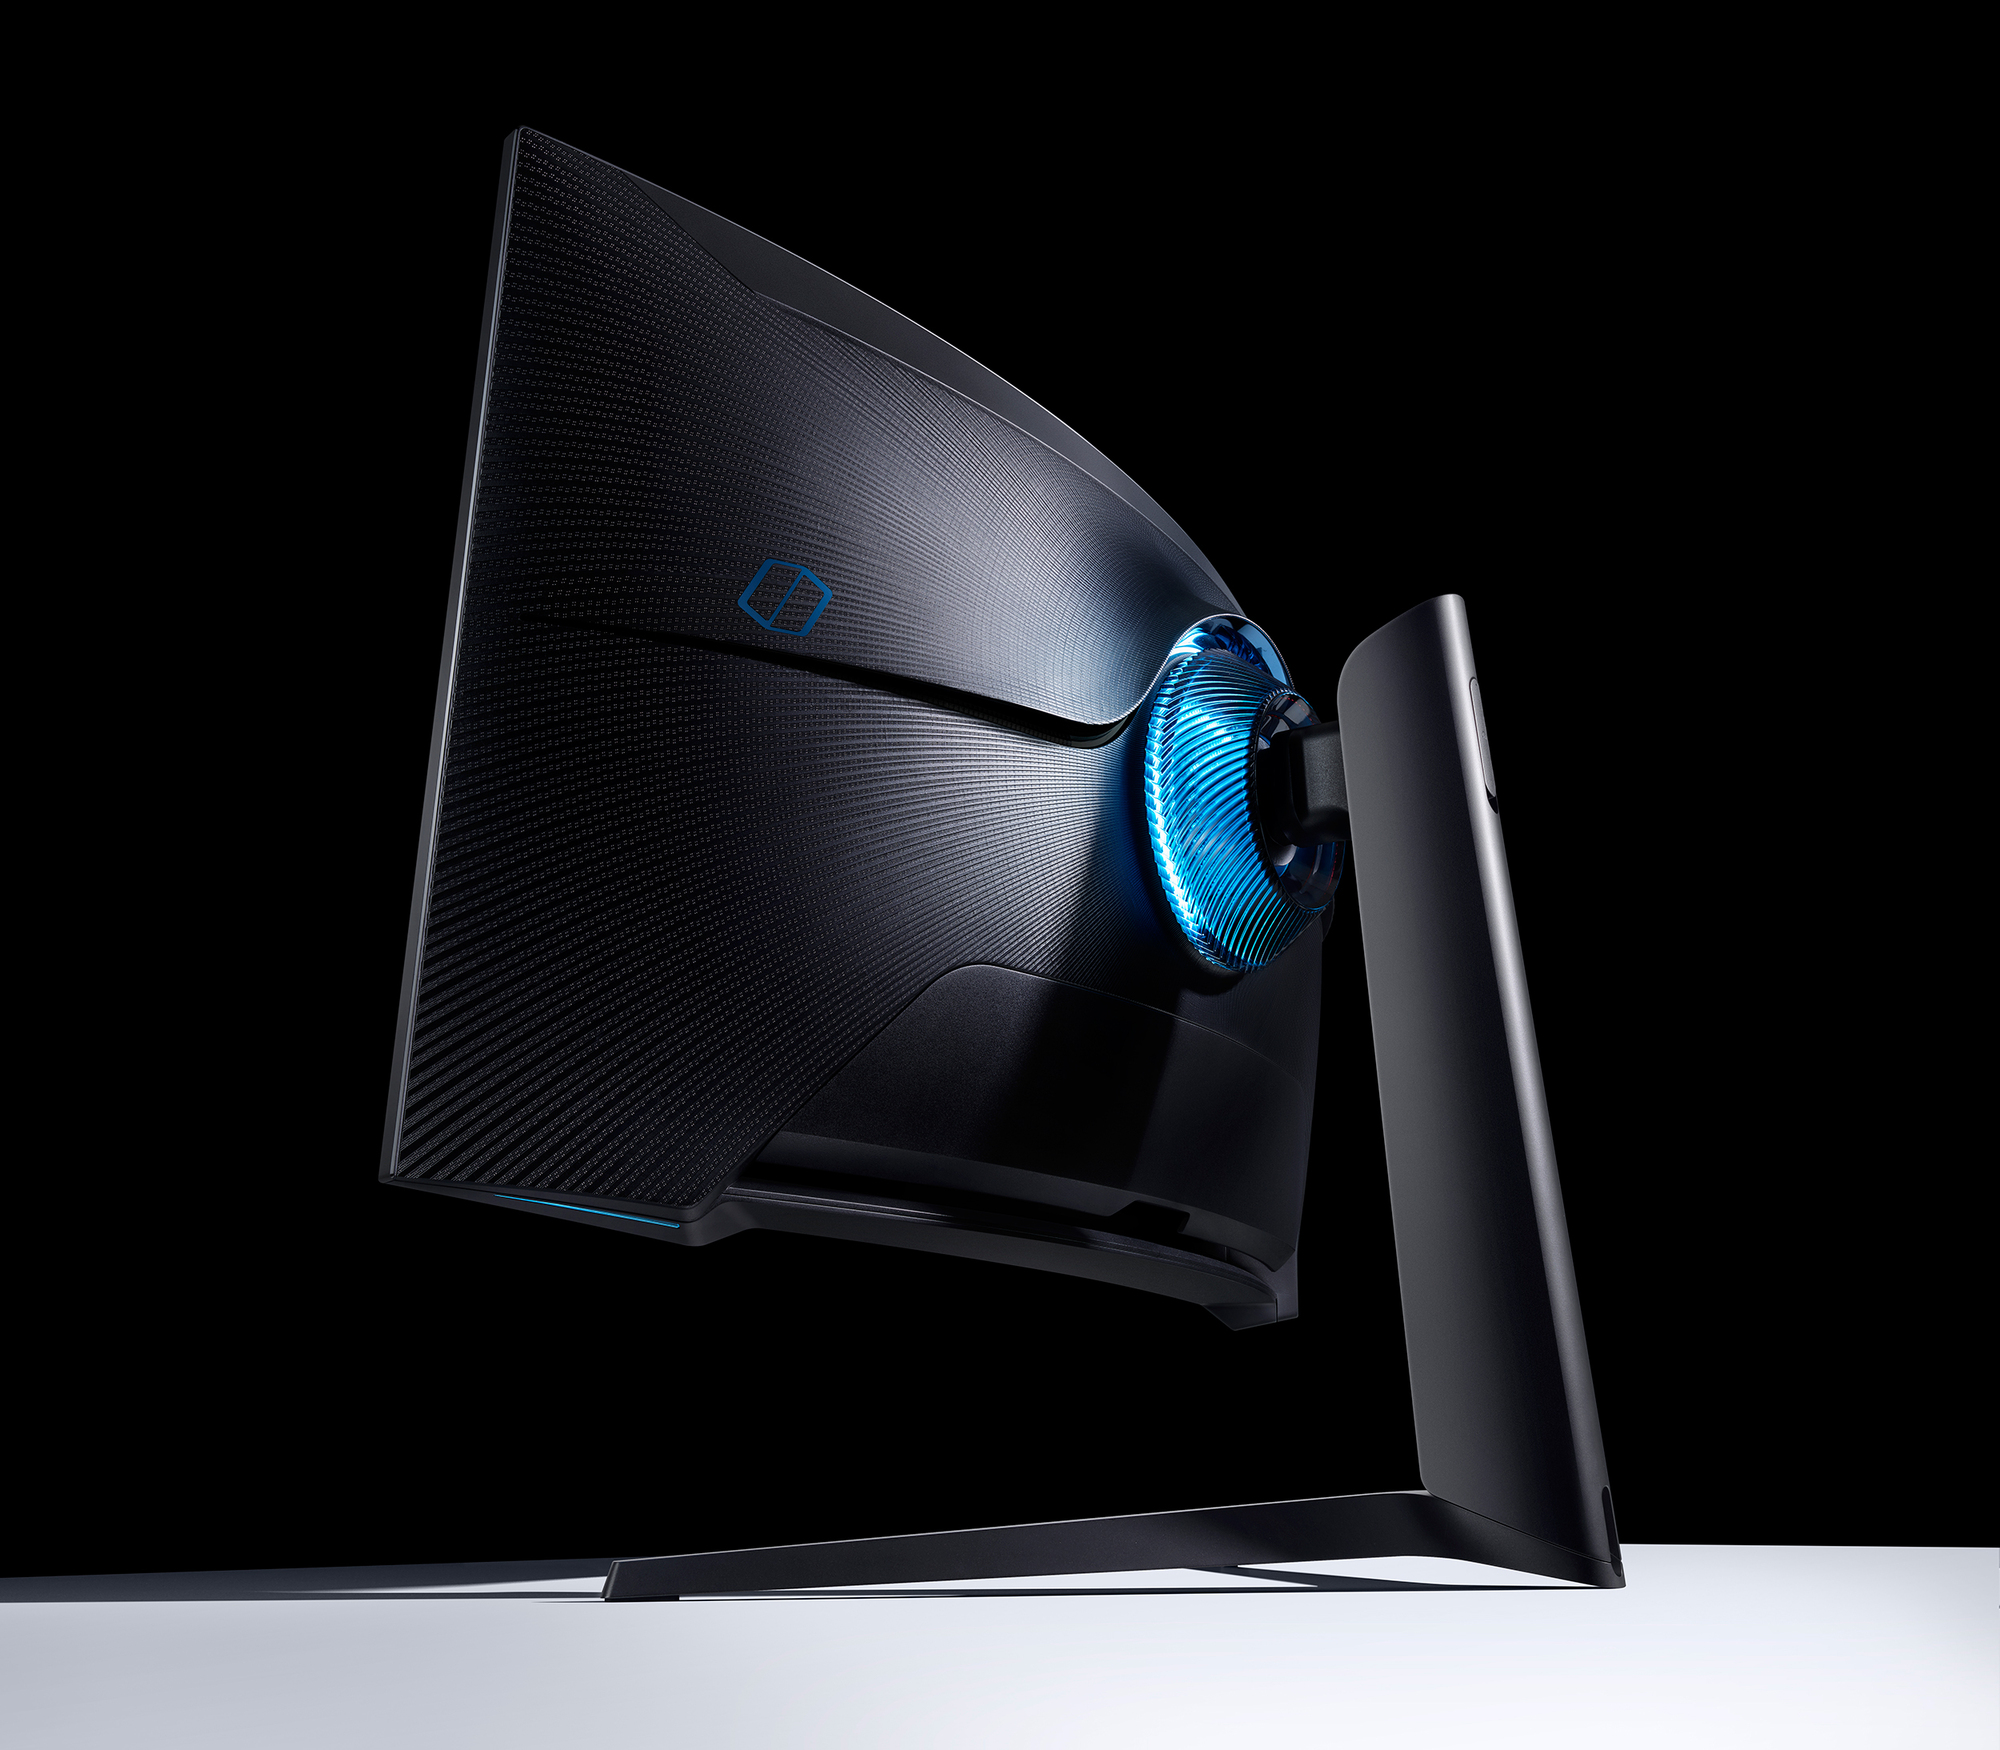 Samsung Globally Launches Odyssey G7 Curved Gaming Monitor 2020-Odyssey-Gaming-Monitors-G7_product1.jpg